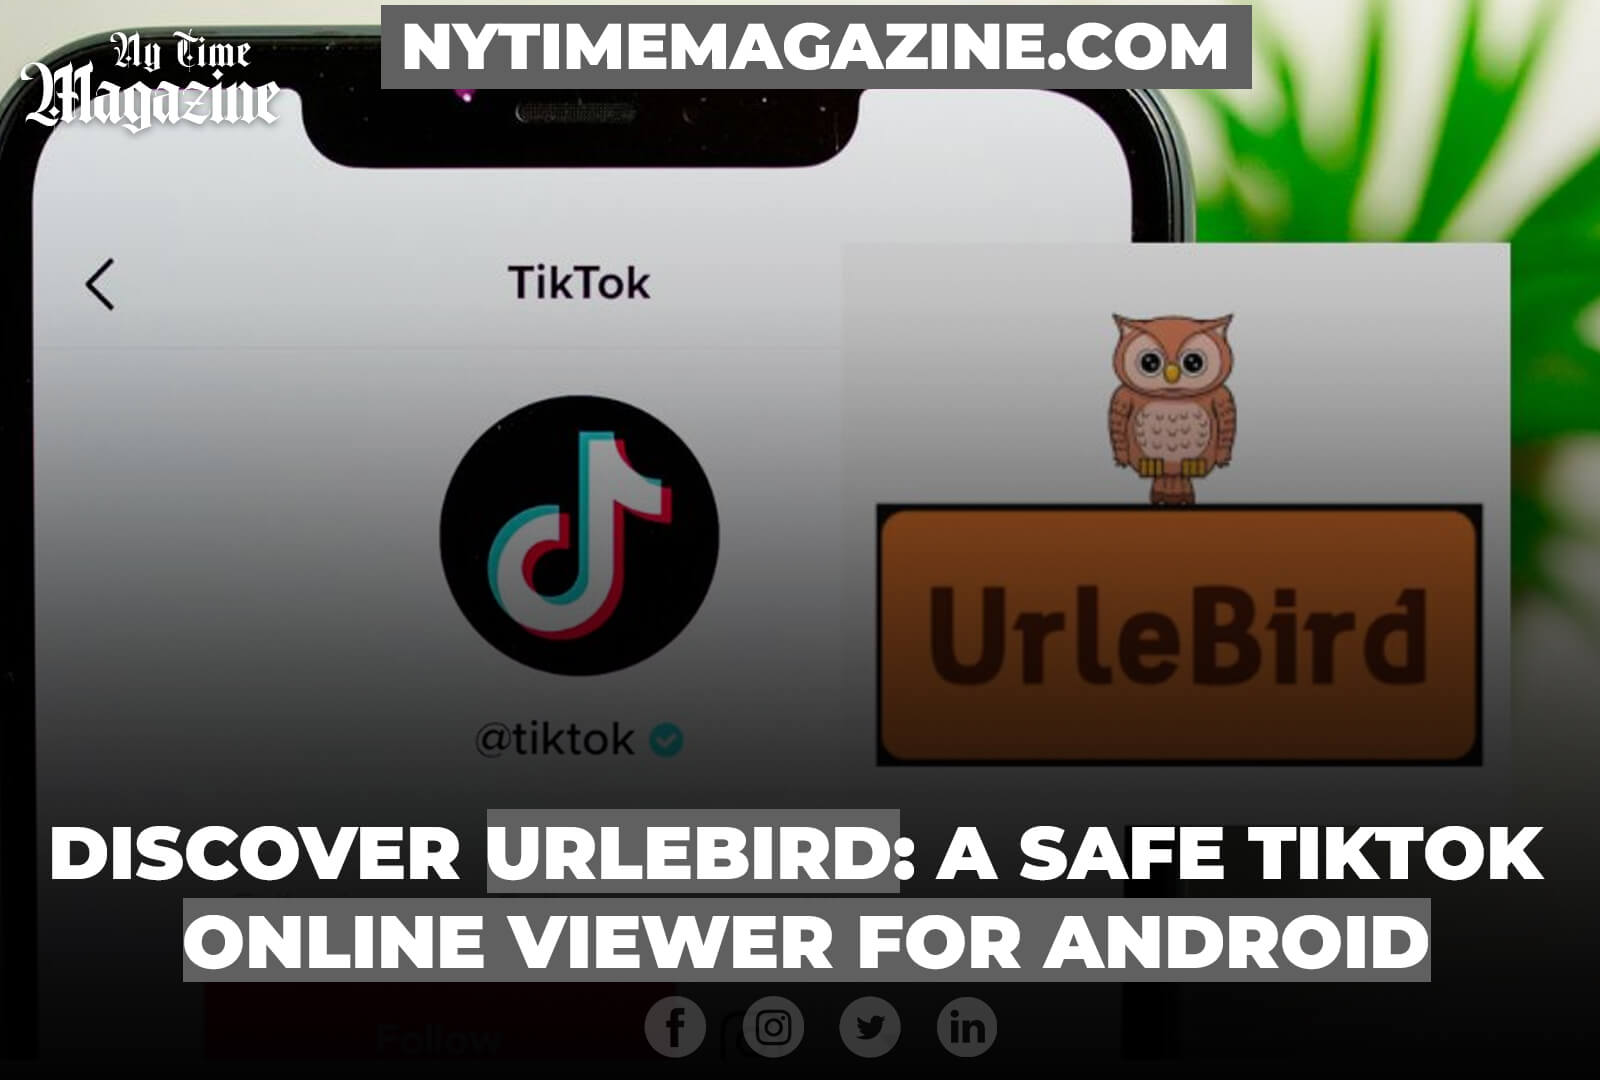 DISCOVER URLEBIRD: A SAFE TIKTOK ONLINE VIEWER FOR ANDROID